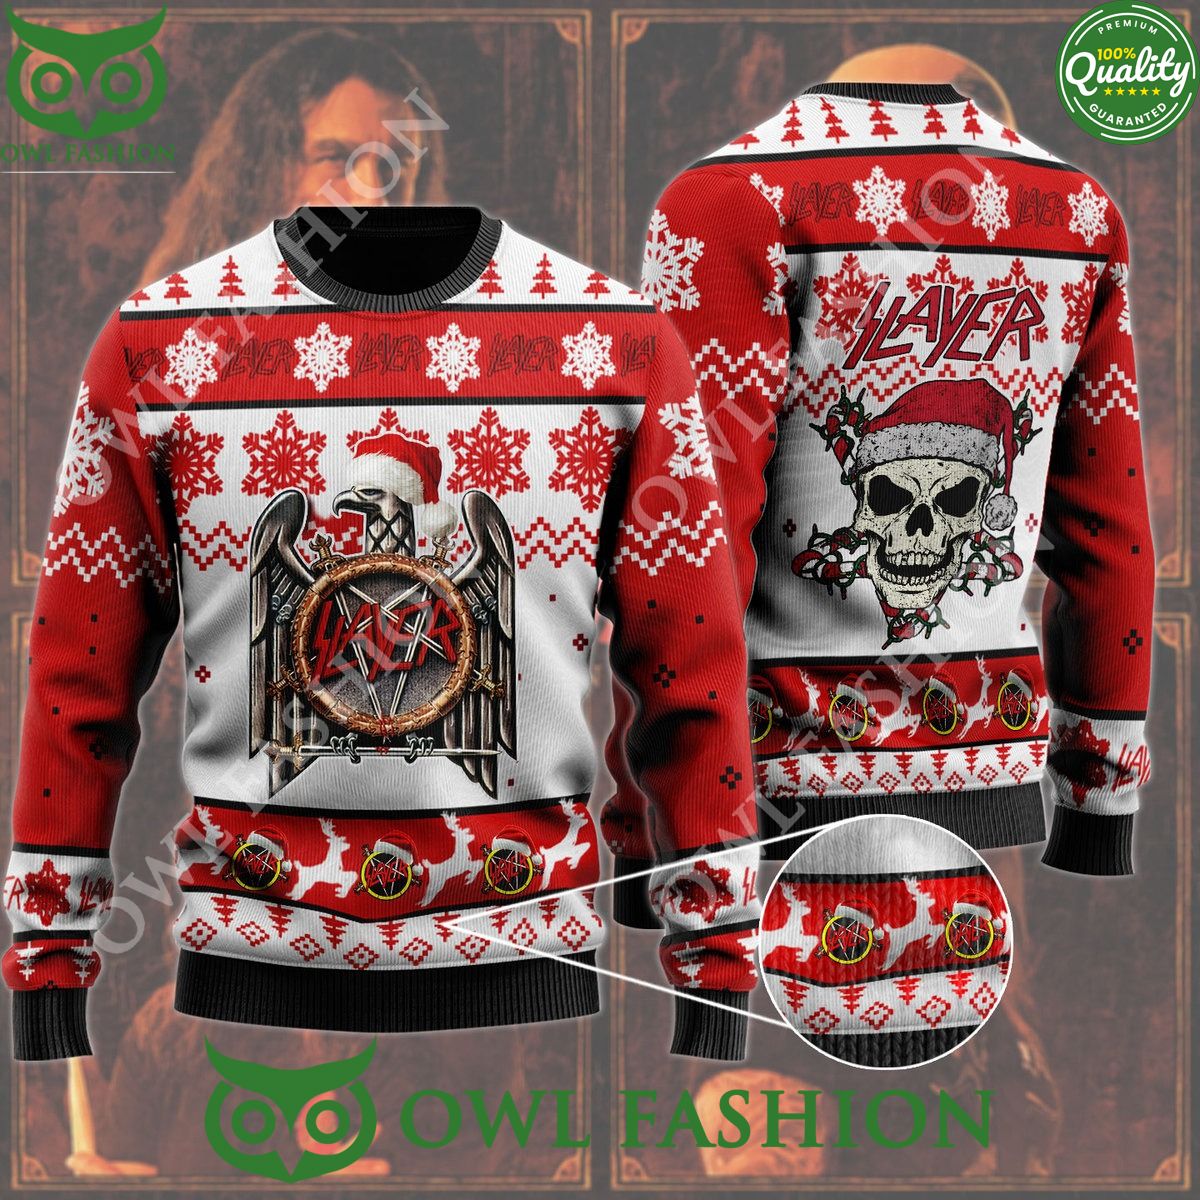 Hot Slayer Metal Band Ugly Sweater Jumper Is this your new friend?